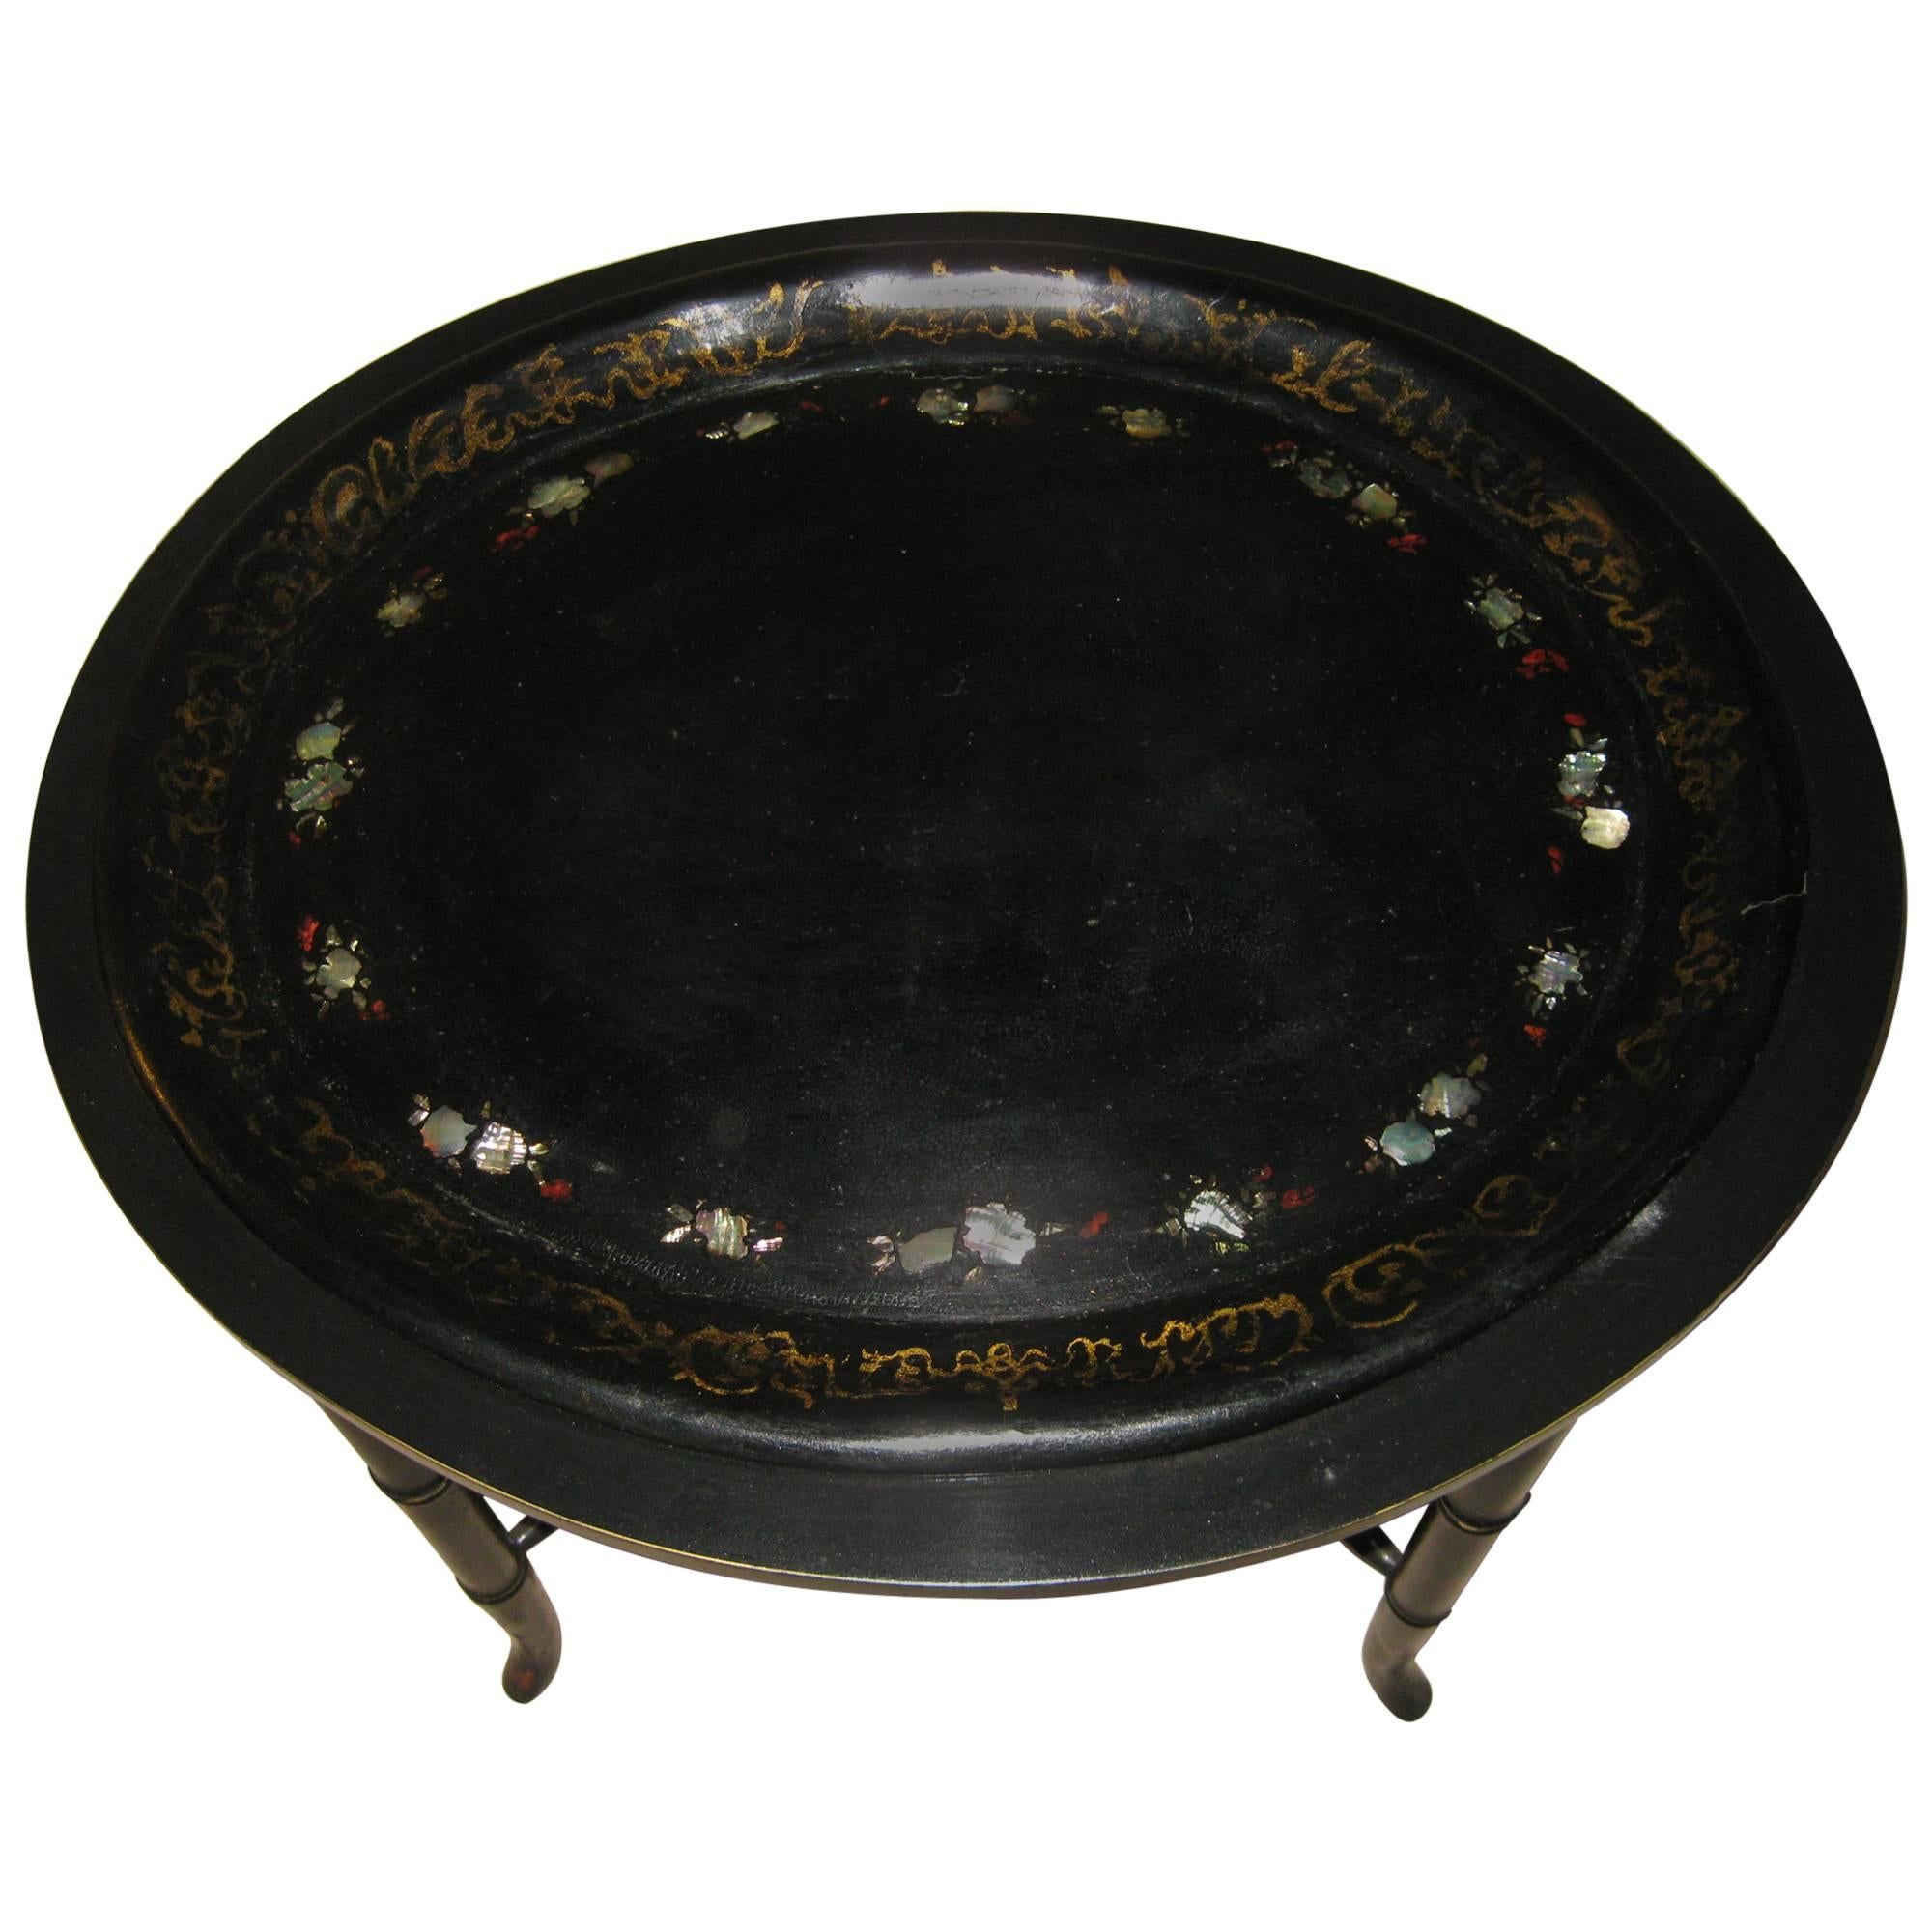 19th century English Black Lacquer and Gilt  Papier-Mache Tray on Stand For Sale